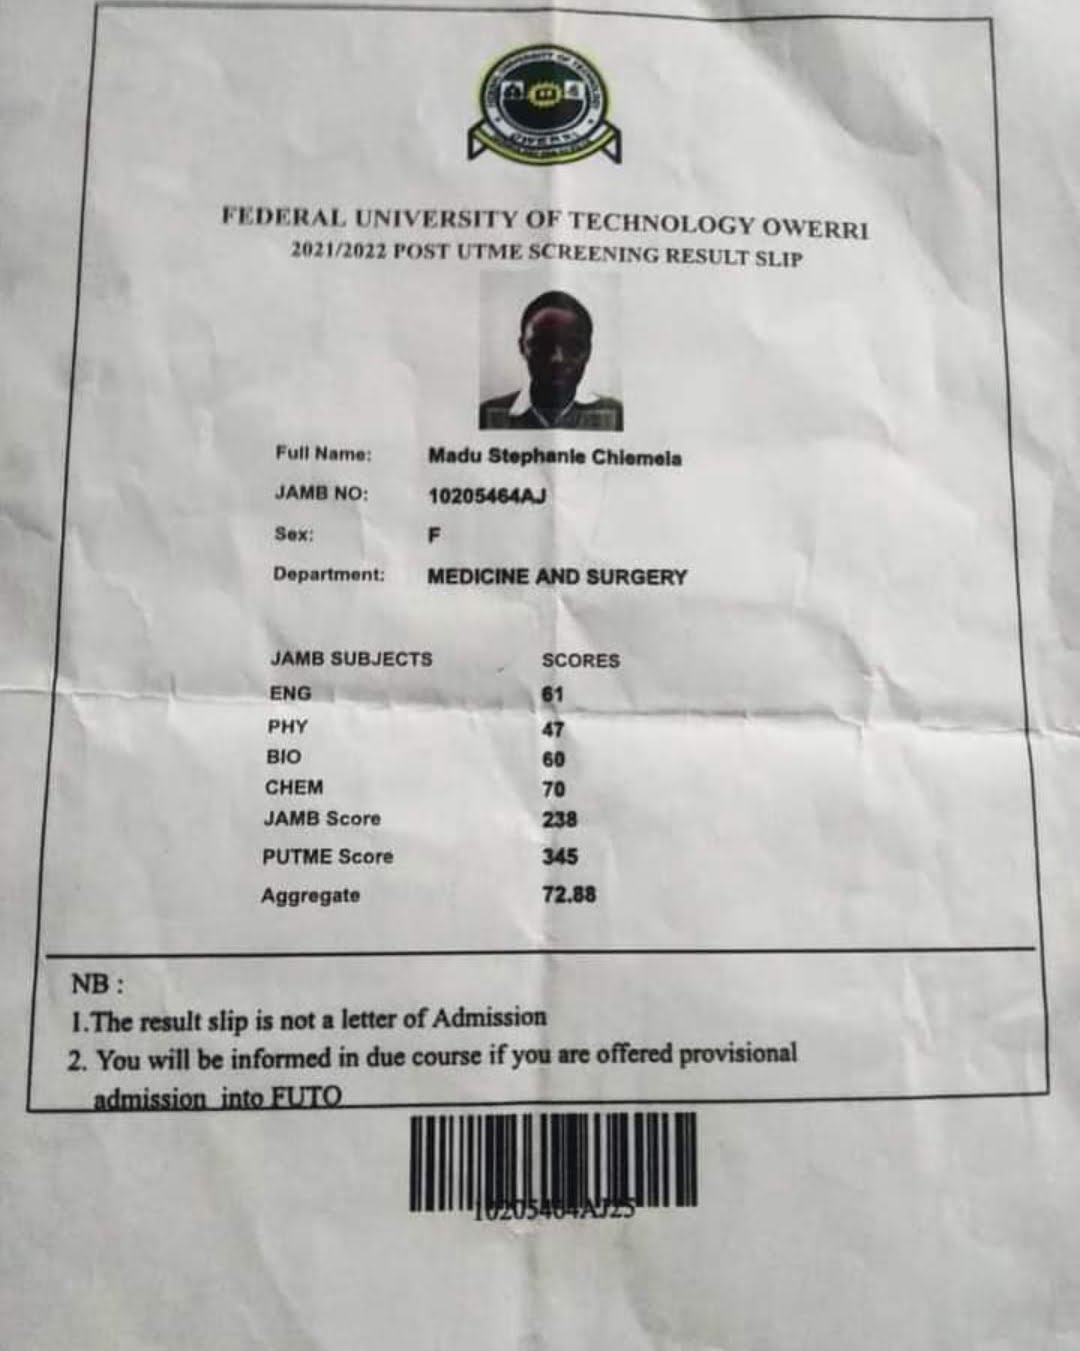 Nigerians Celebrate Smart Girl Who Scored A’s in All Her WAEC Papers, Got 345 in FUTO Post UTME